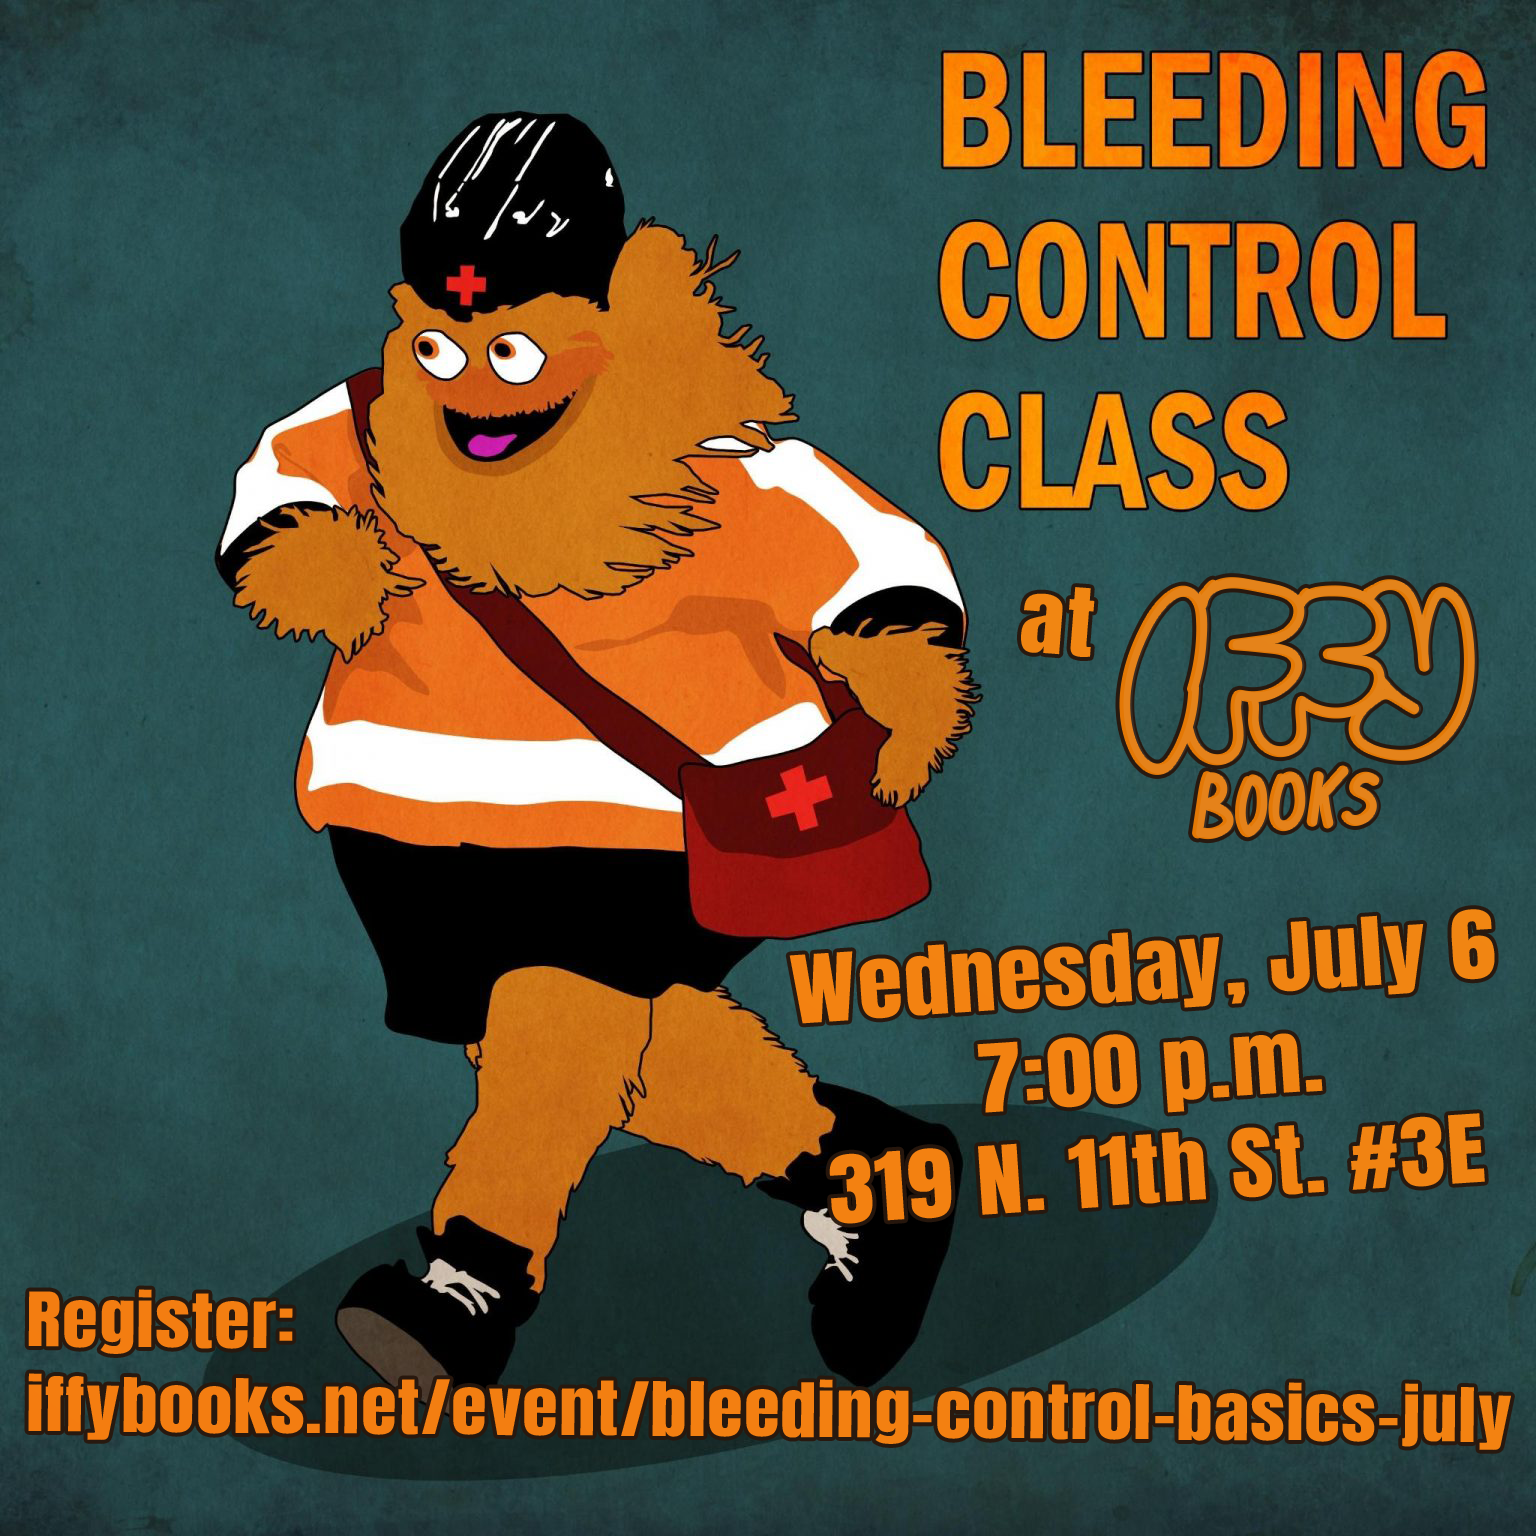 Gritty (hairy orange mascot of the Flyers) in stride, wearing a hockey helmet and shoulder bag adorned with red crosses. Orange text on the right side of the image says "BLEEDING CONTROL CLASS at Iffy Books / Wednesday, July 6 / 7:00 p.m. / 319 N. 11th St. #3E / Register: https://iffybooks.net/event/bleeding-control-basics-july/"